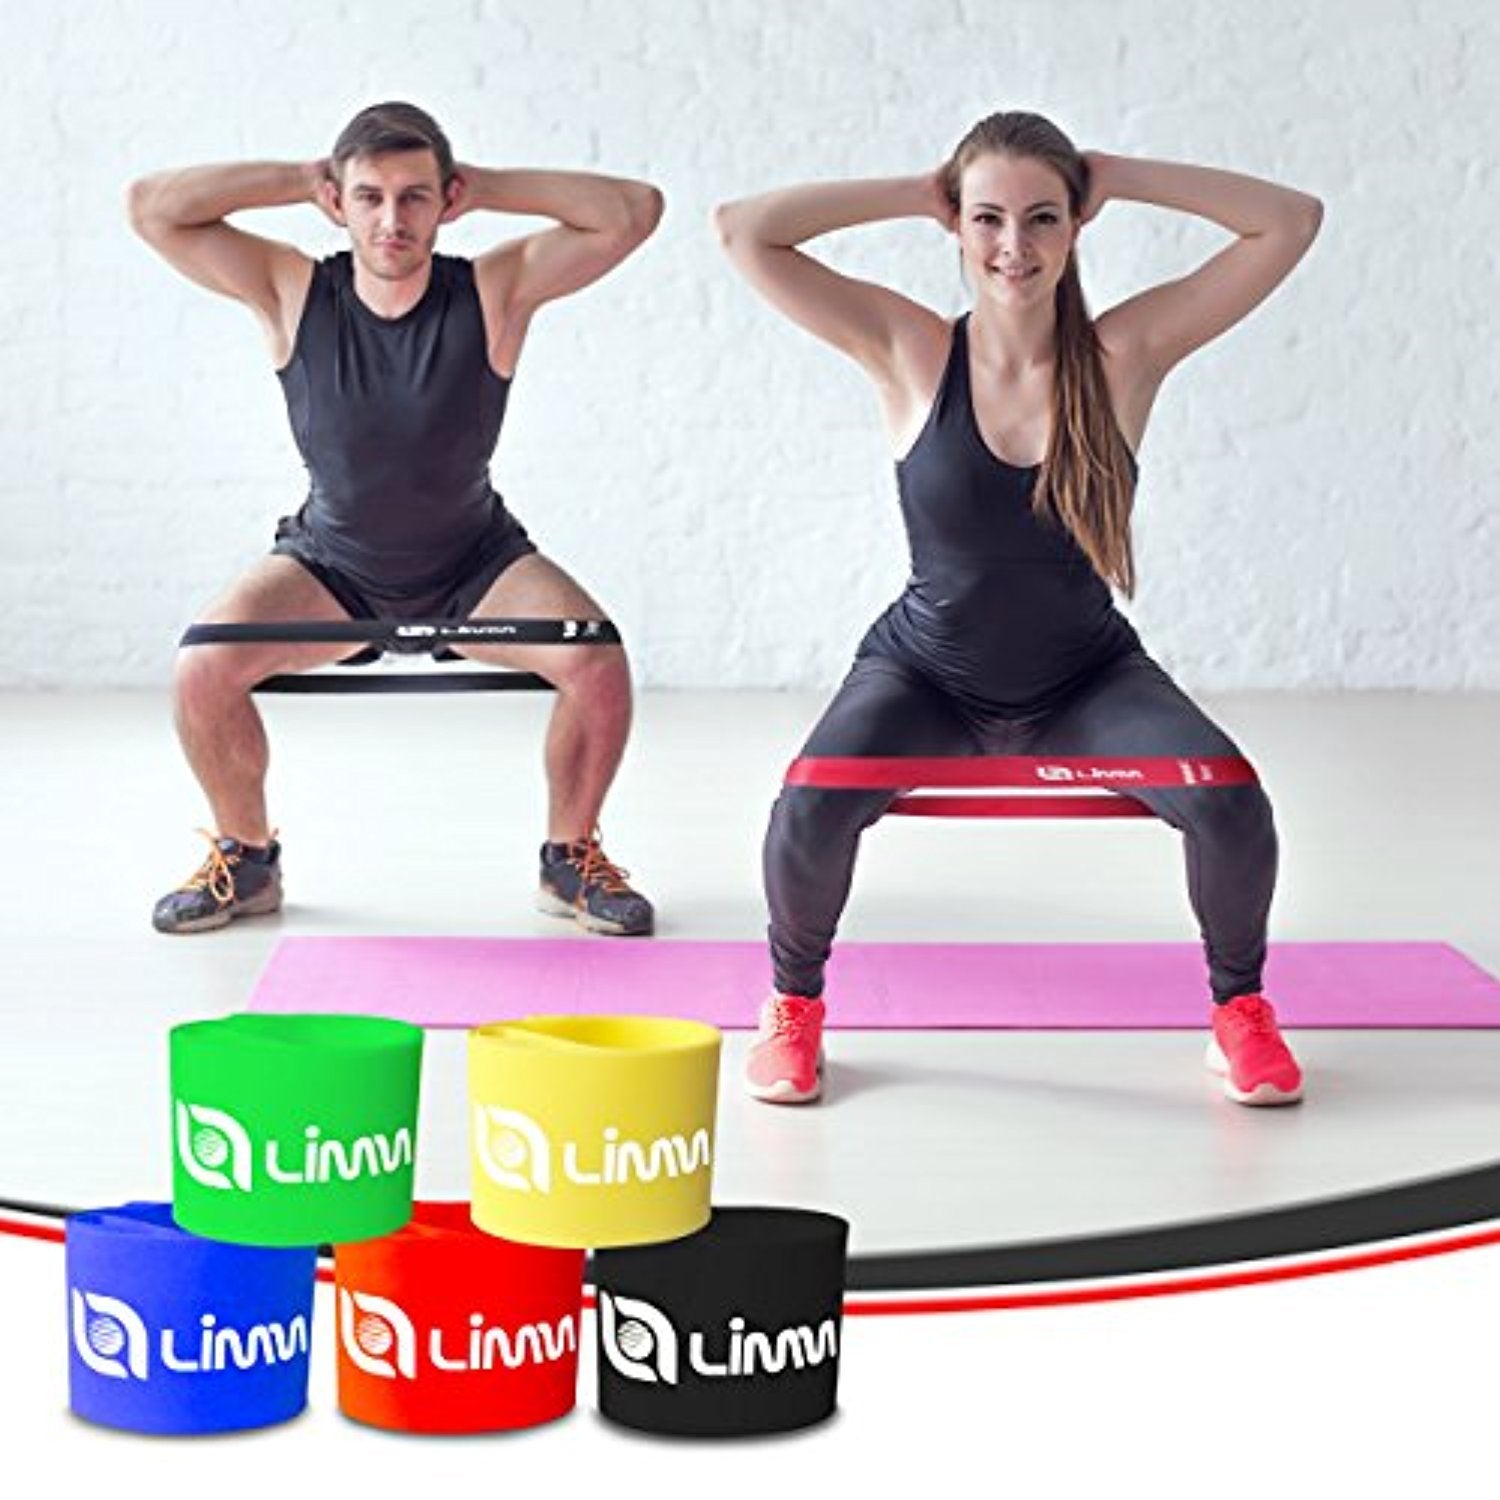 Premium Resistance Bands Exercise Loops - Set of 5, 12-inch